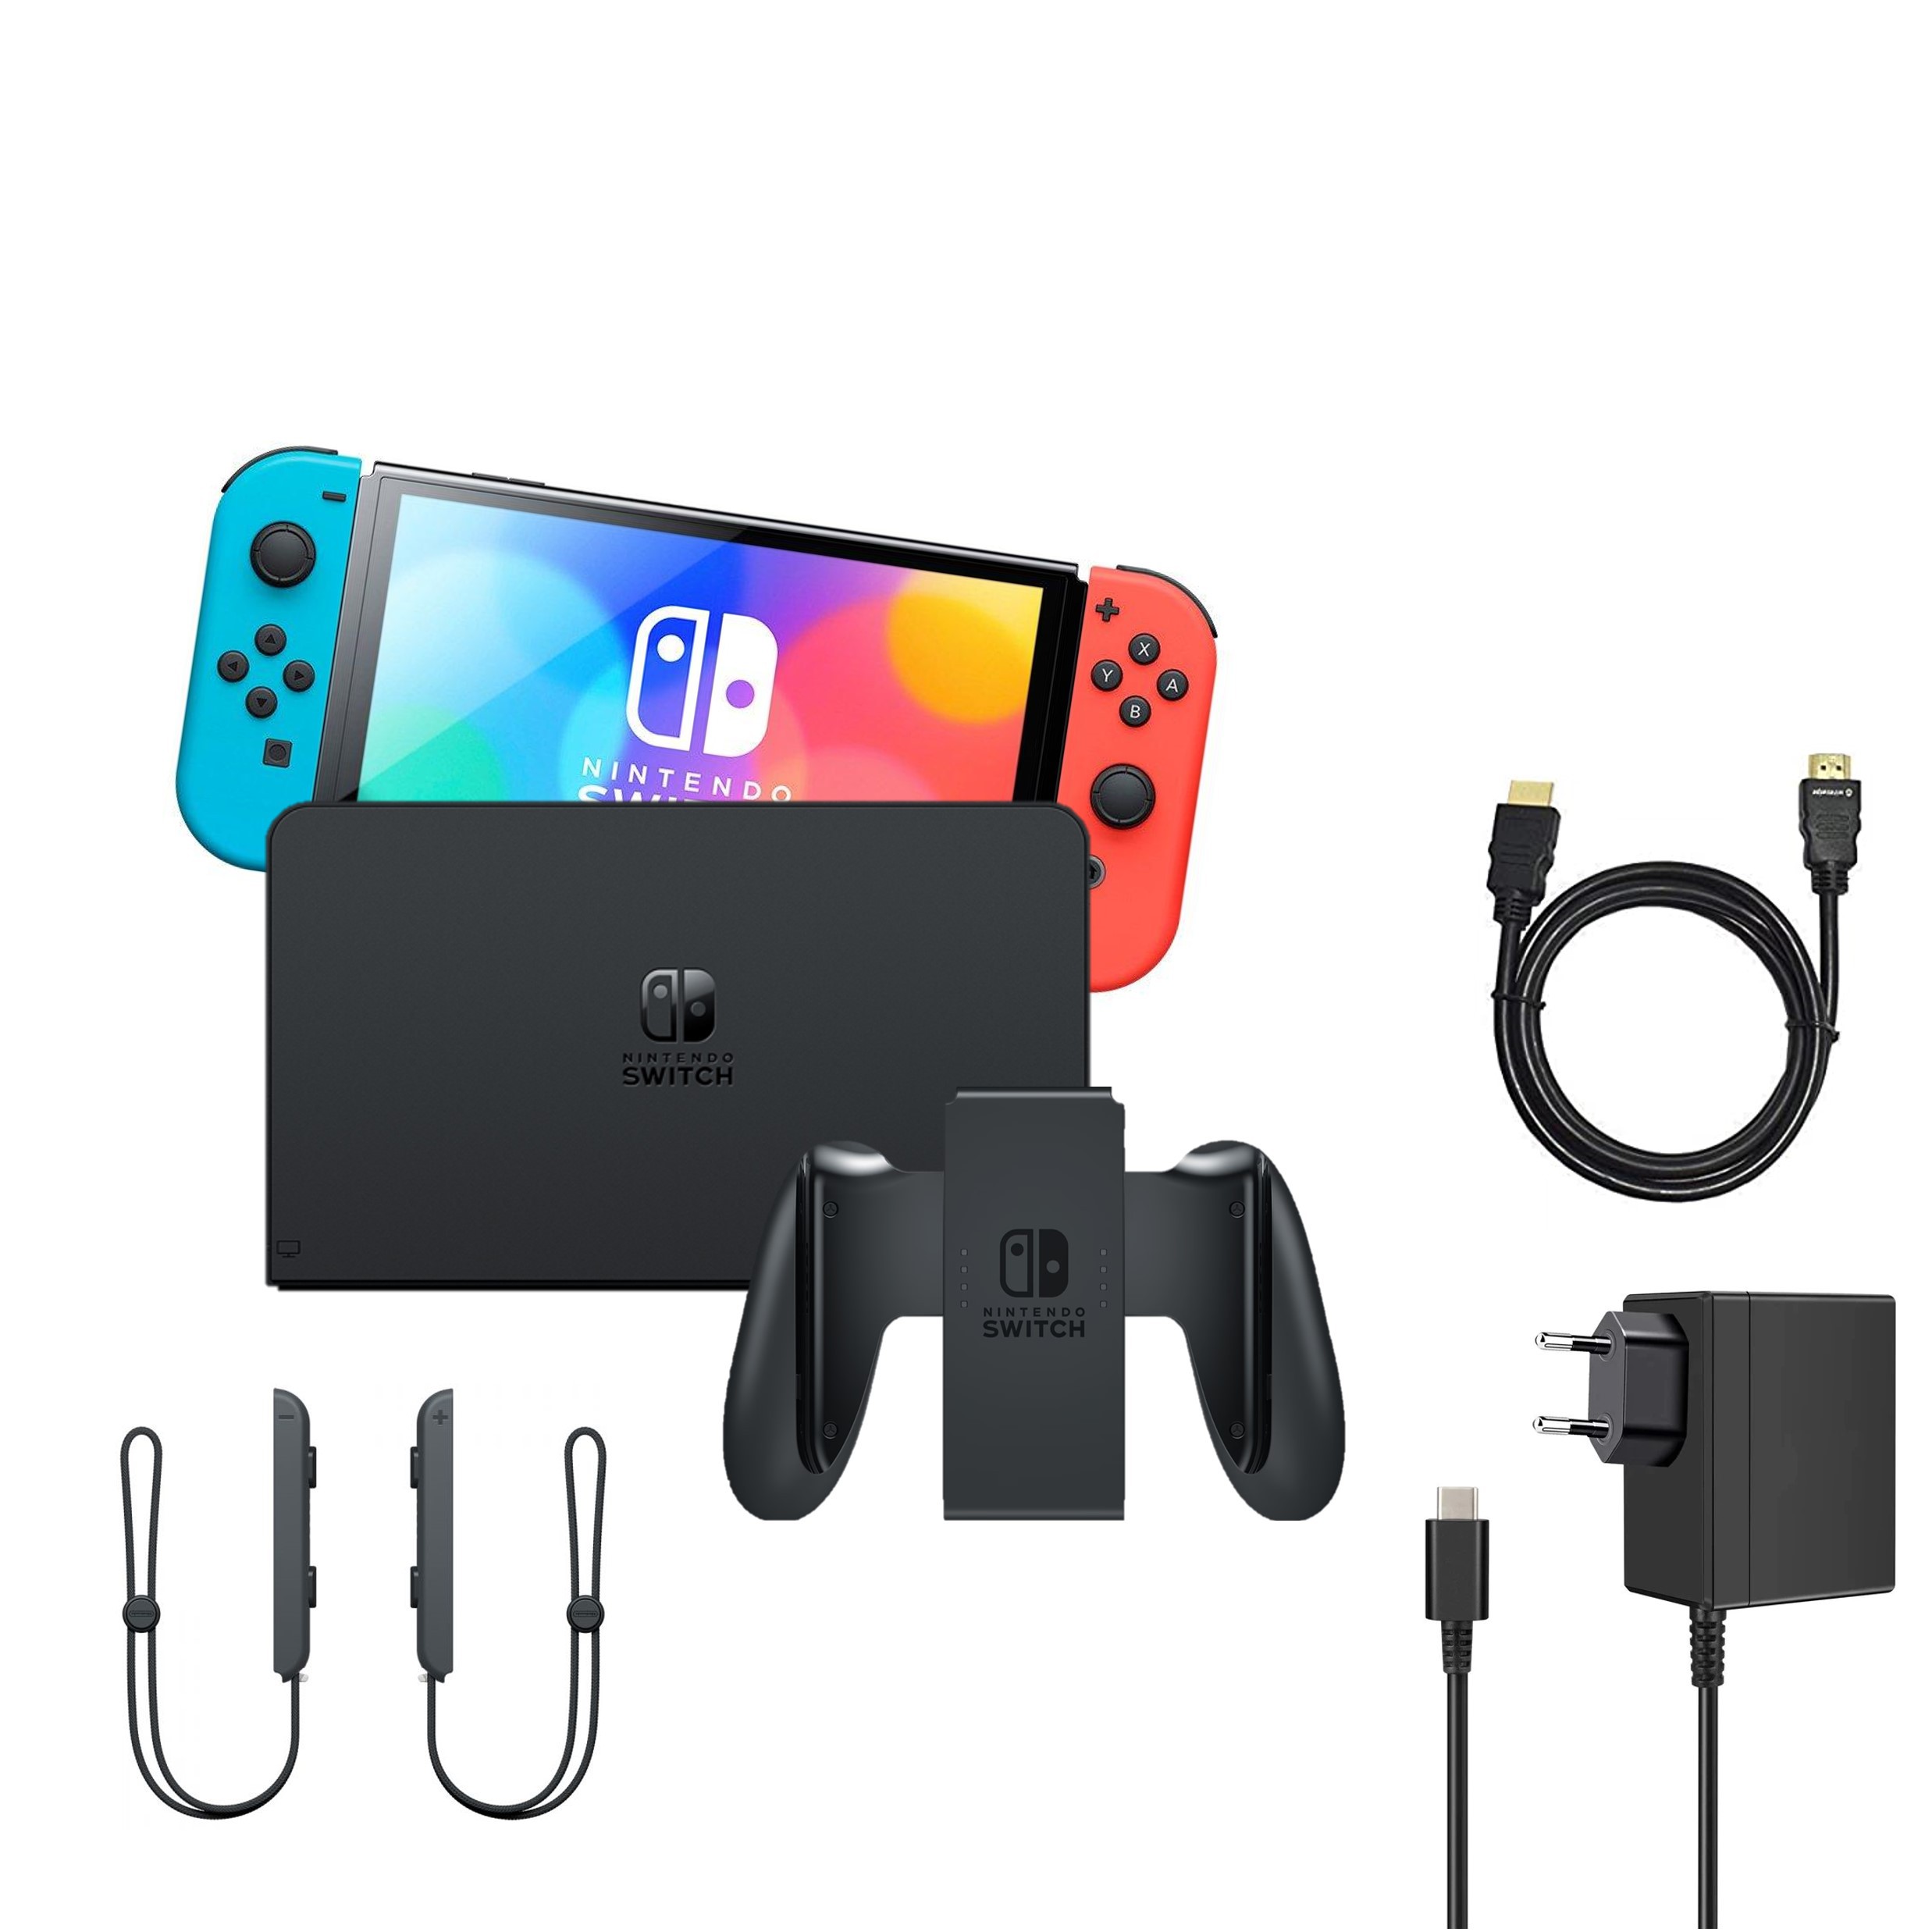 Nintendo Switch Console OLED Starter Pack - Red/Blue - Nintendo Switch Hardware - 5